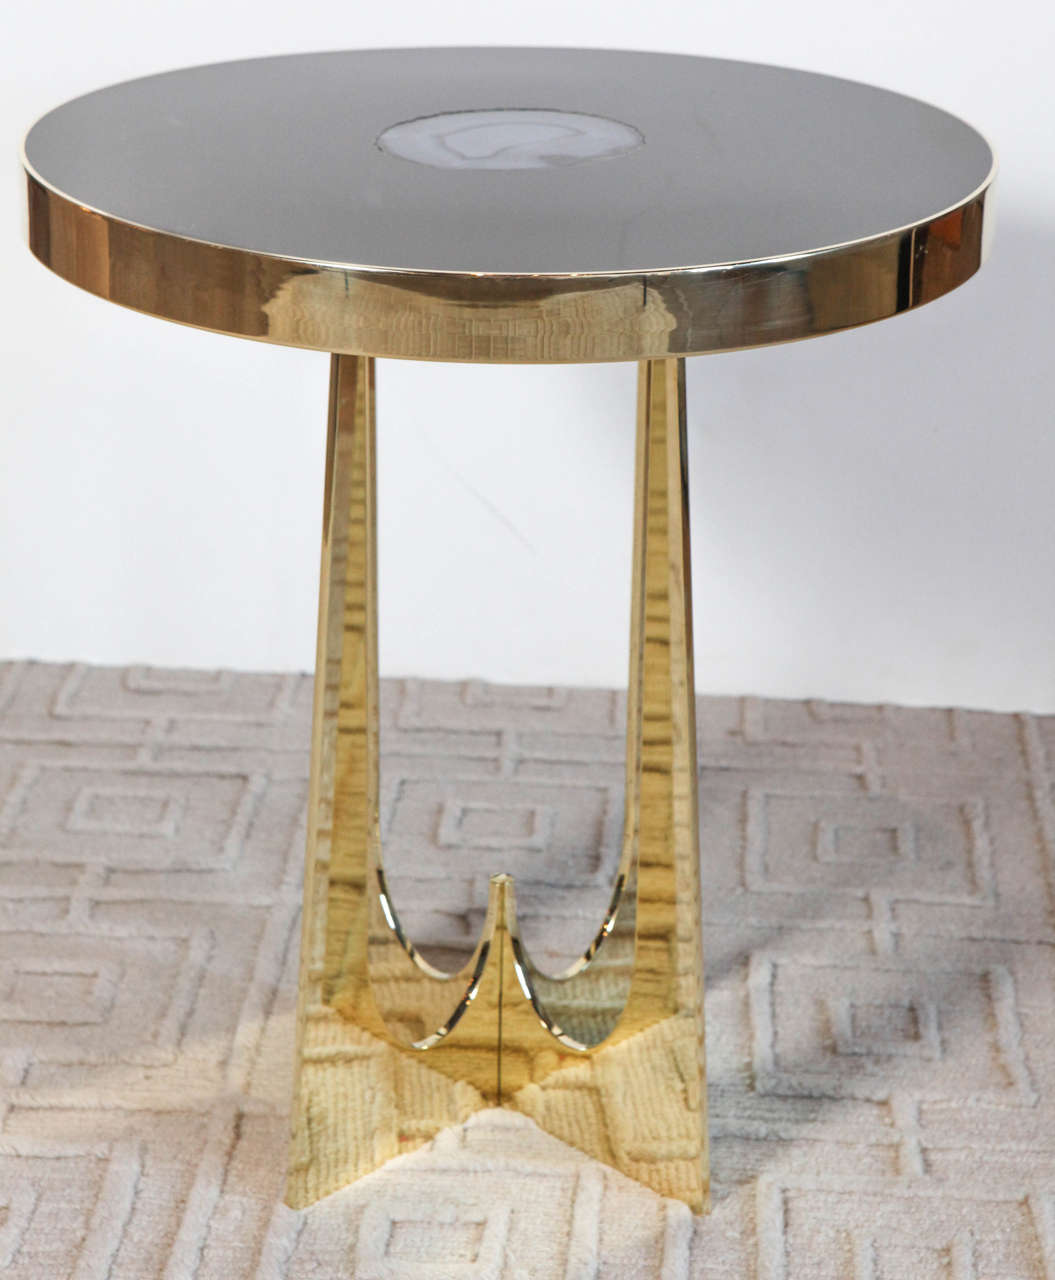 Beautiful brass and resin with an agate inclusion side table designed by Adam Thomas Hebb. His work with resin, ammonite and/or stone make each of his pieces a little unique jewel. They are handmade in his studio in Los Angeles. 

Currently we